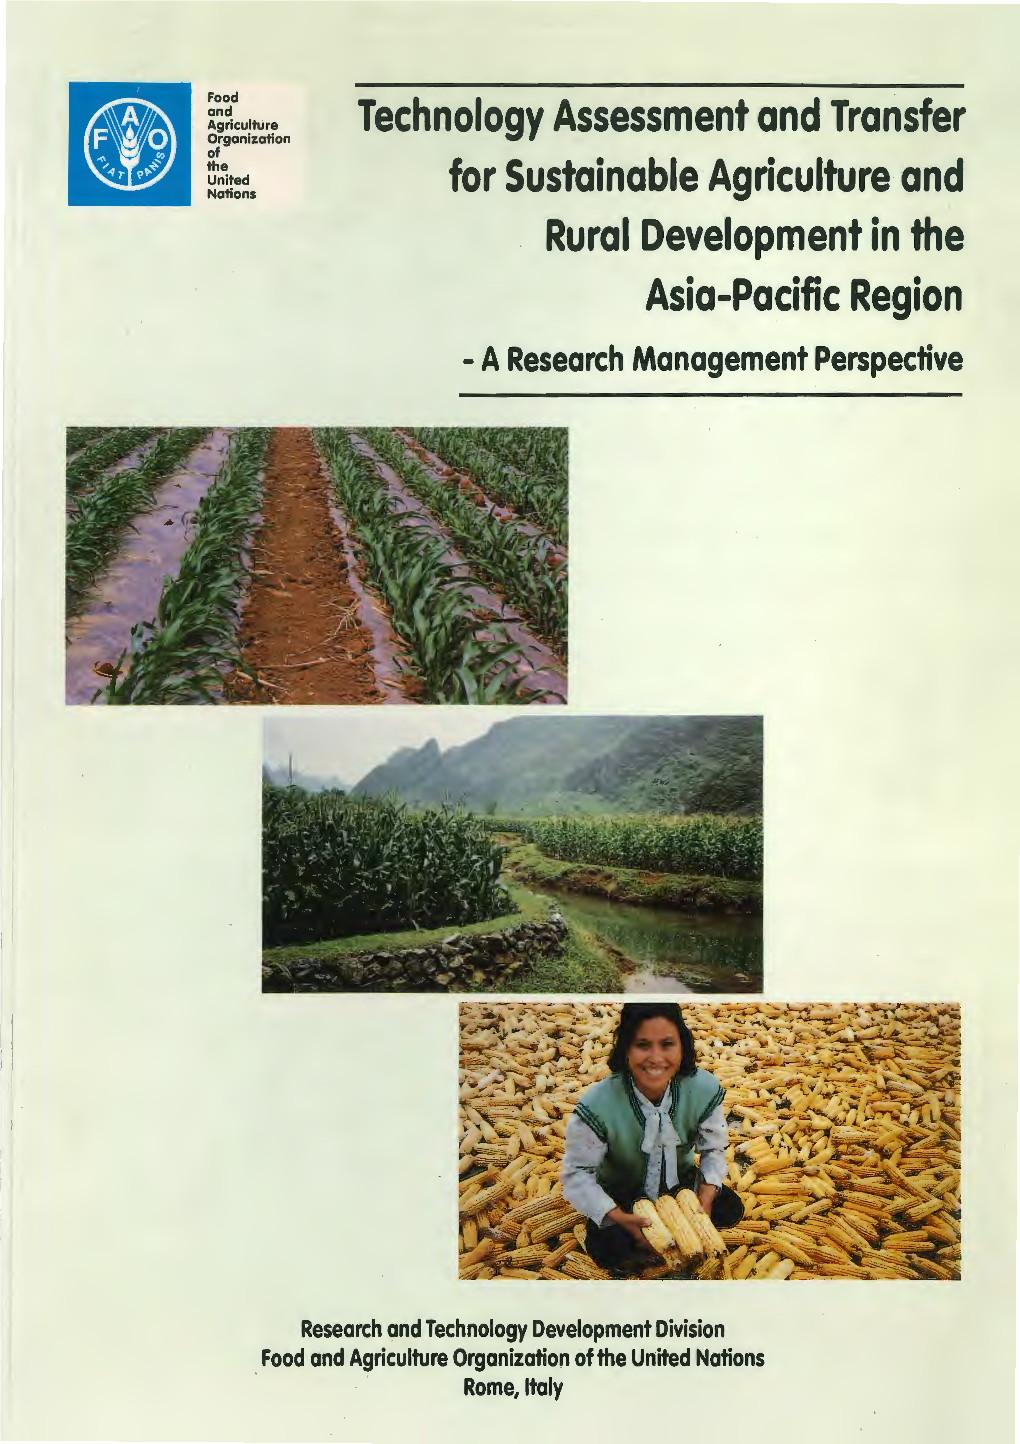 Technology Assessment and Transfer for Sustainable Agriculture and Rural Development in the Asia-Pacific Region - a Research Management Perspective